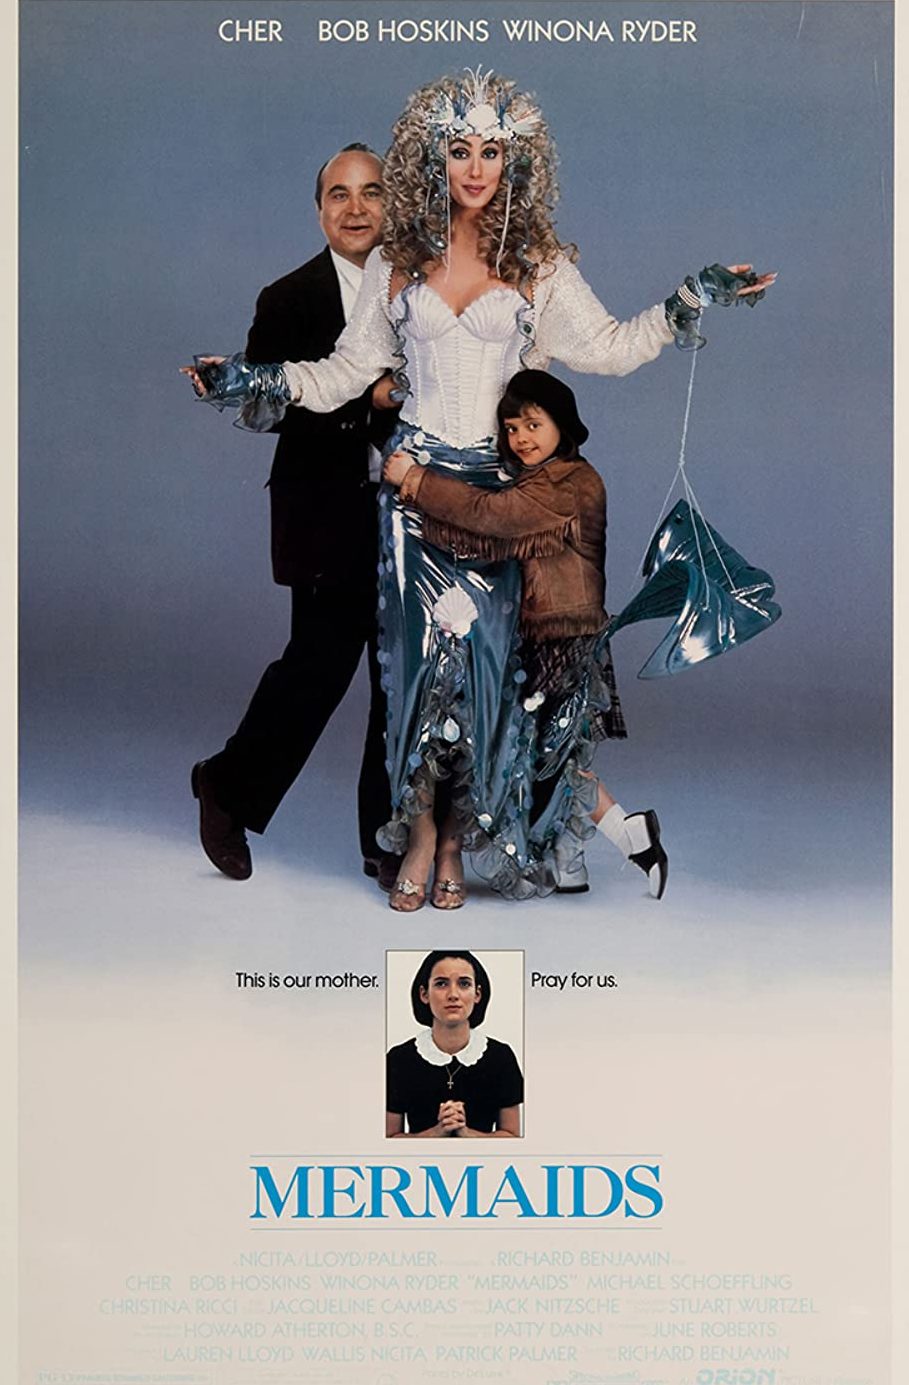 a blue grey background that fades to cream in the lower third. A woman in a mermaid costume smiling to the camera. She is being hugged by a small girl in a brown fringed jacked and a man in a suit. Under their feet is a photo of a girl praying in a black dress. Text: This is our mother. Pray for us. Mermaids